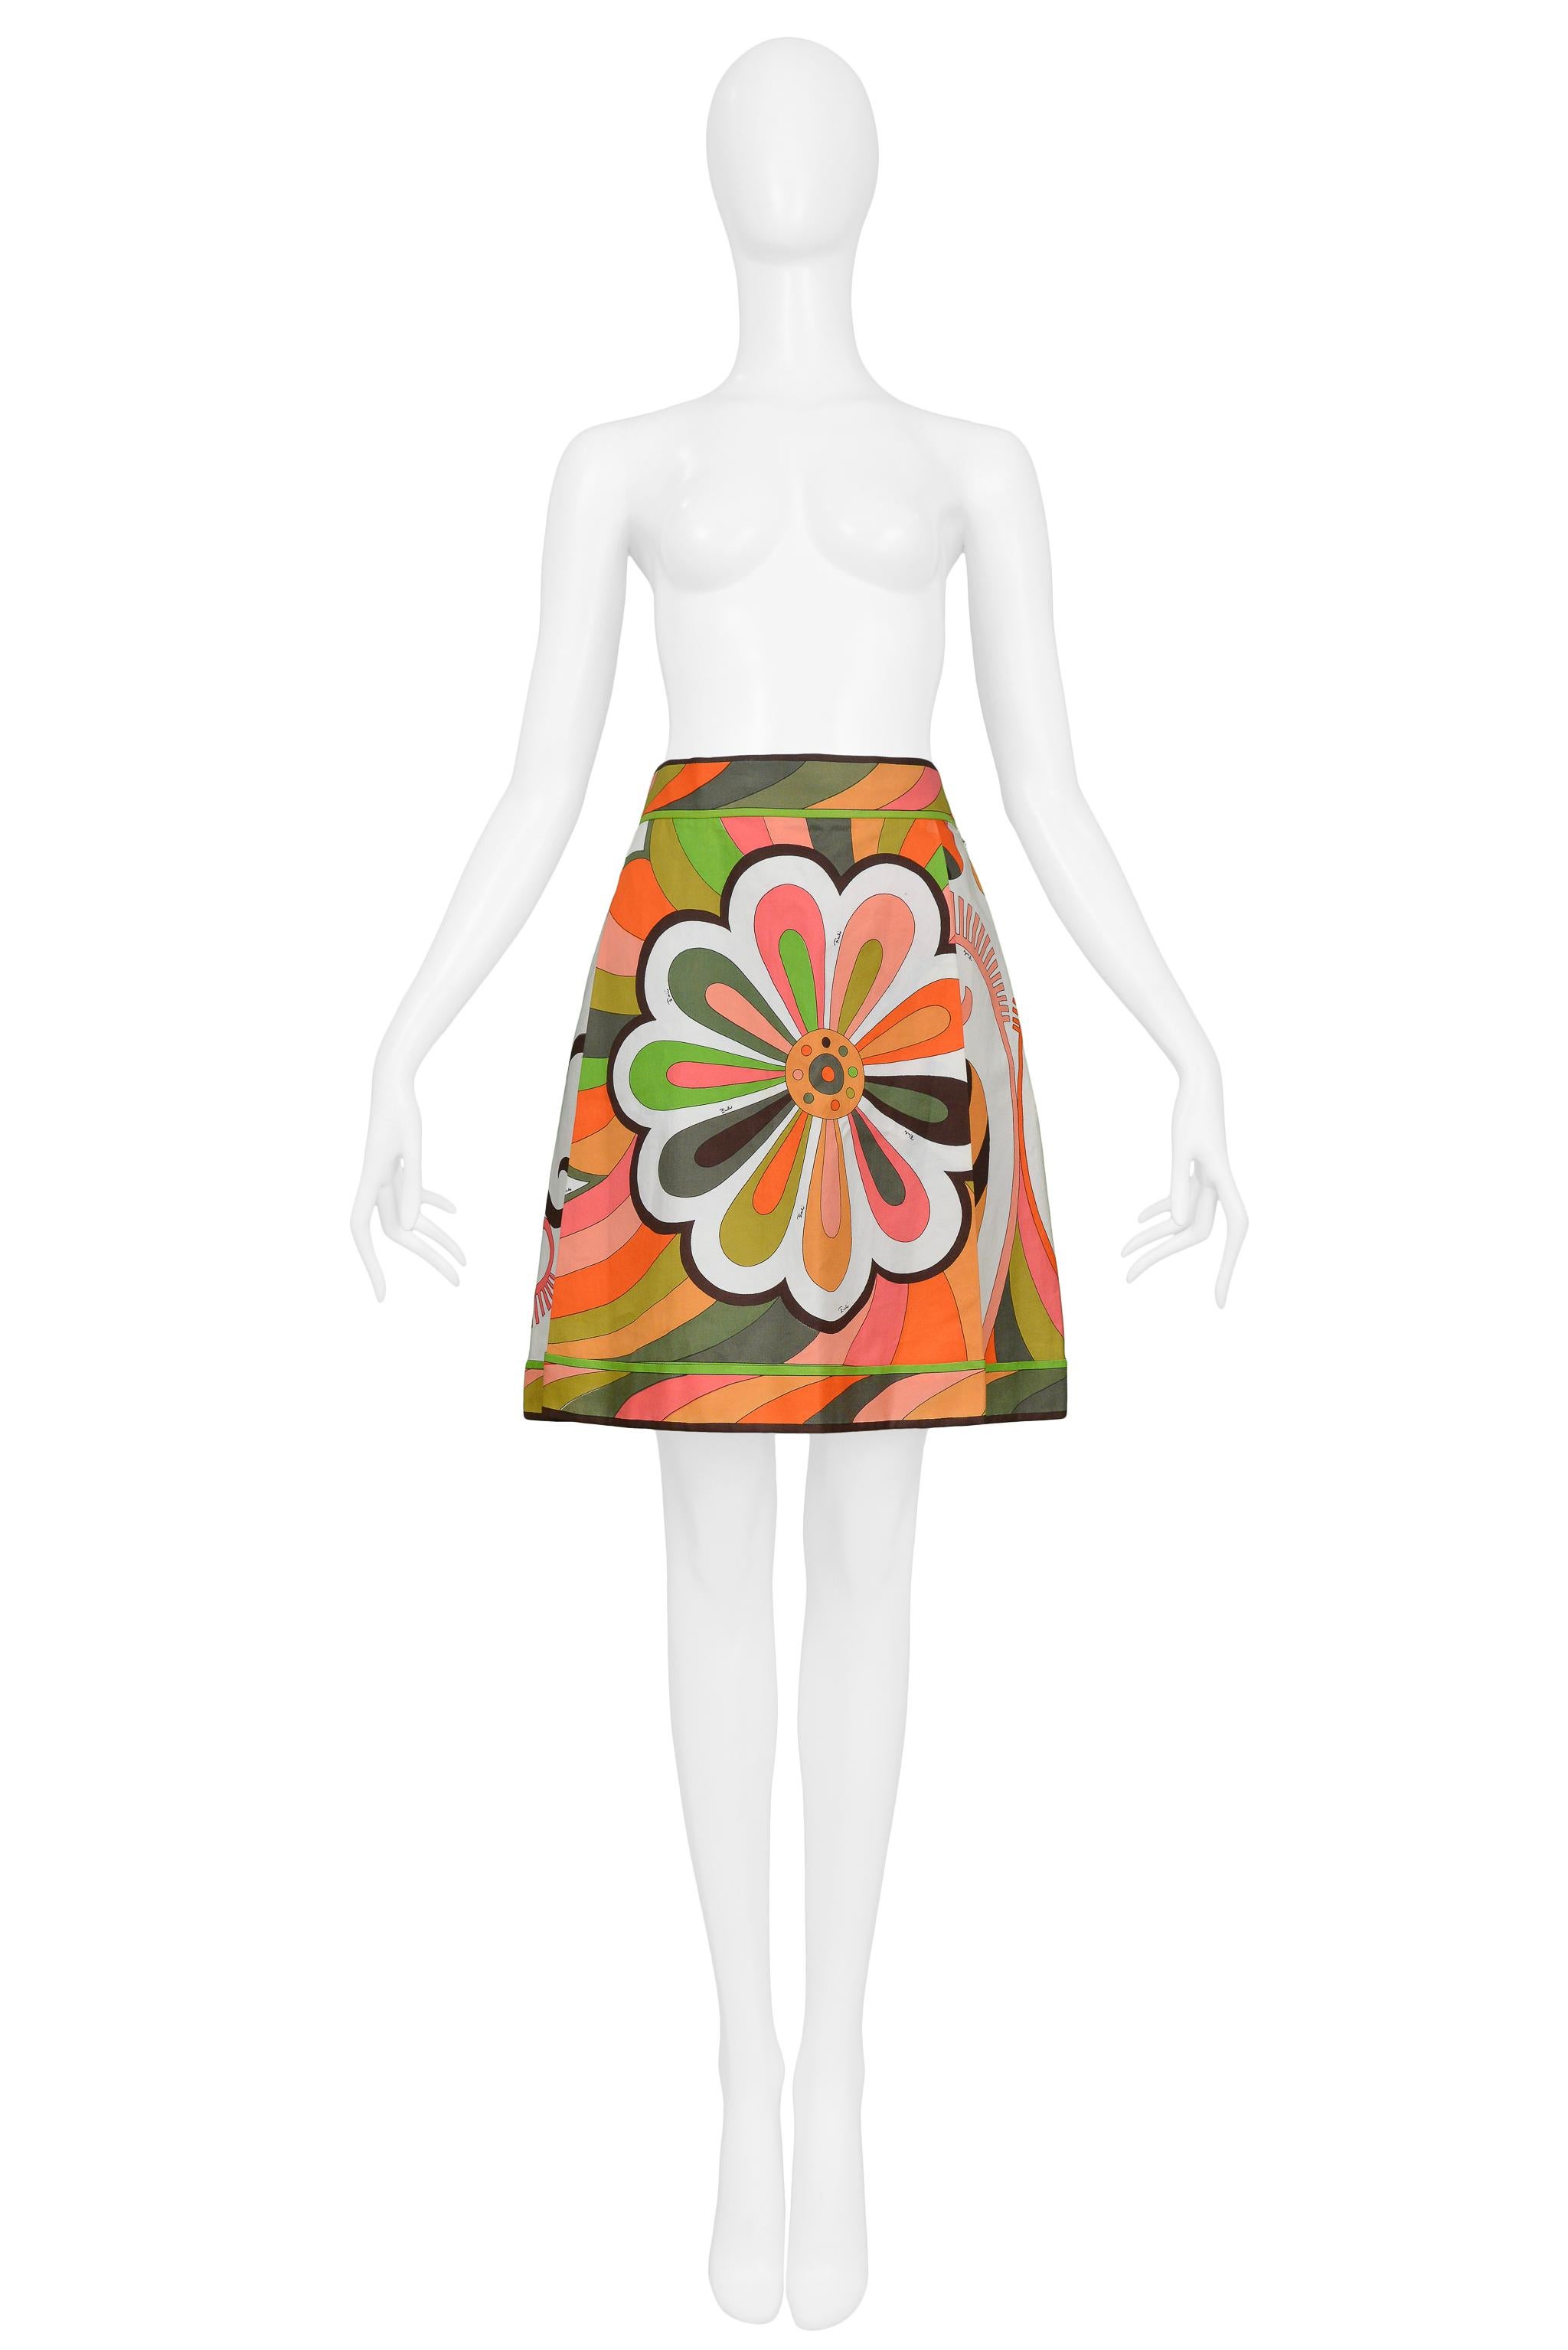 Resurrection Vintage is excited to offer a vintage Emilio Pucci multicolor cotton day skirt featuring an abstract floral print with 